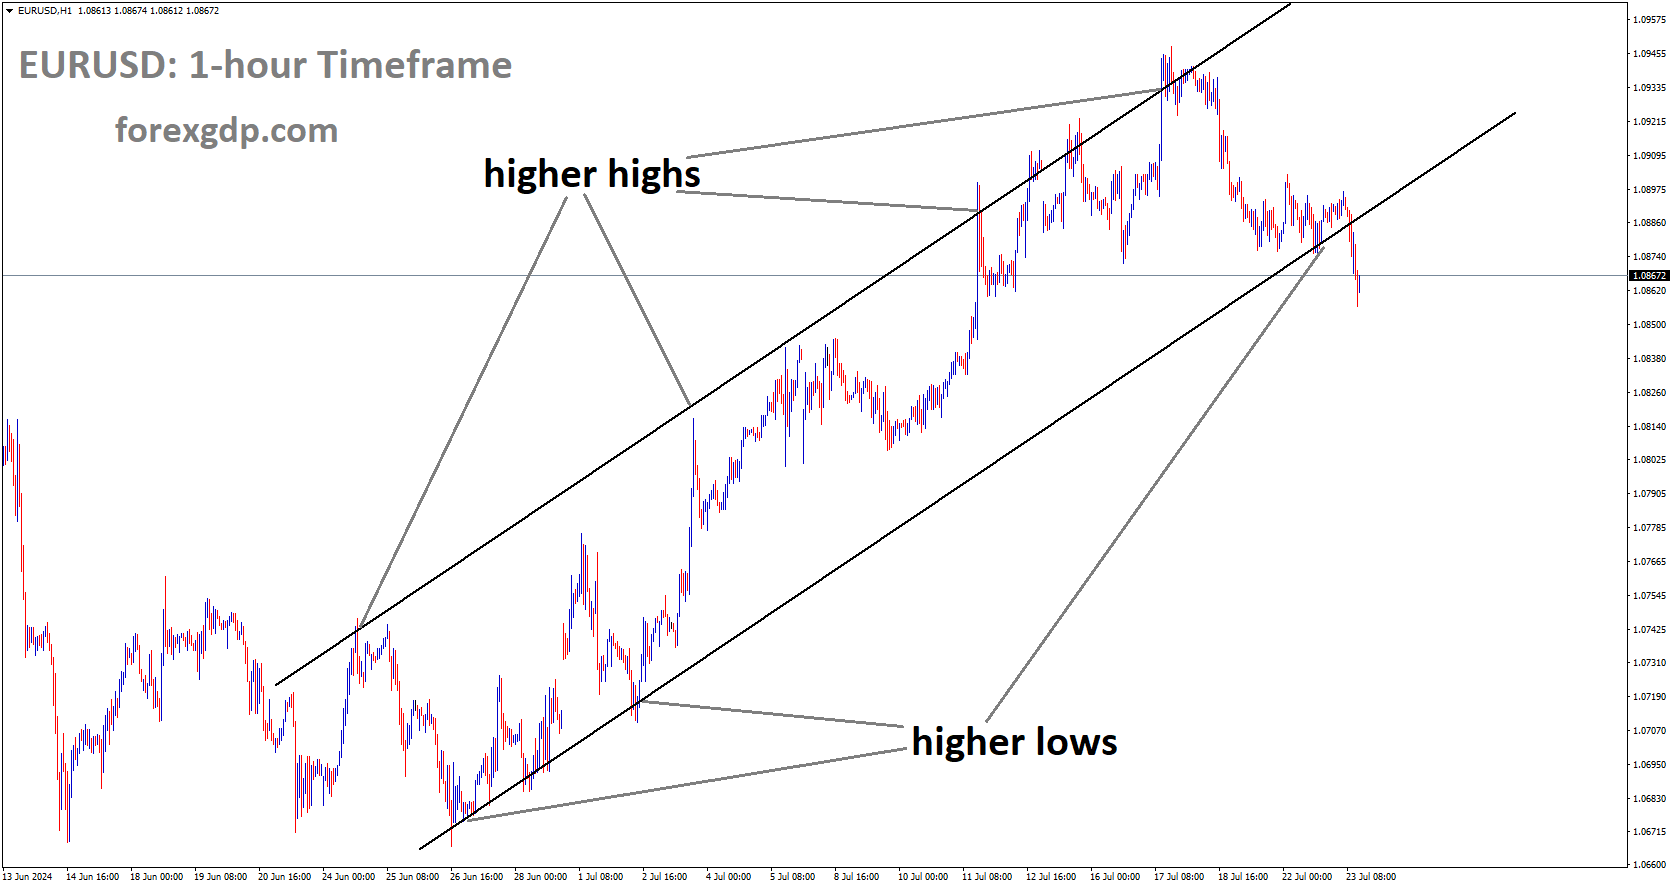 EURUSD is moving in Ascending channel and market has reached higher low area of the channel